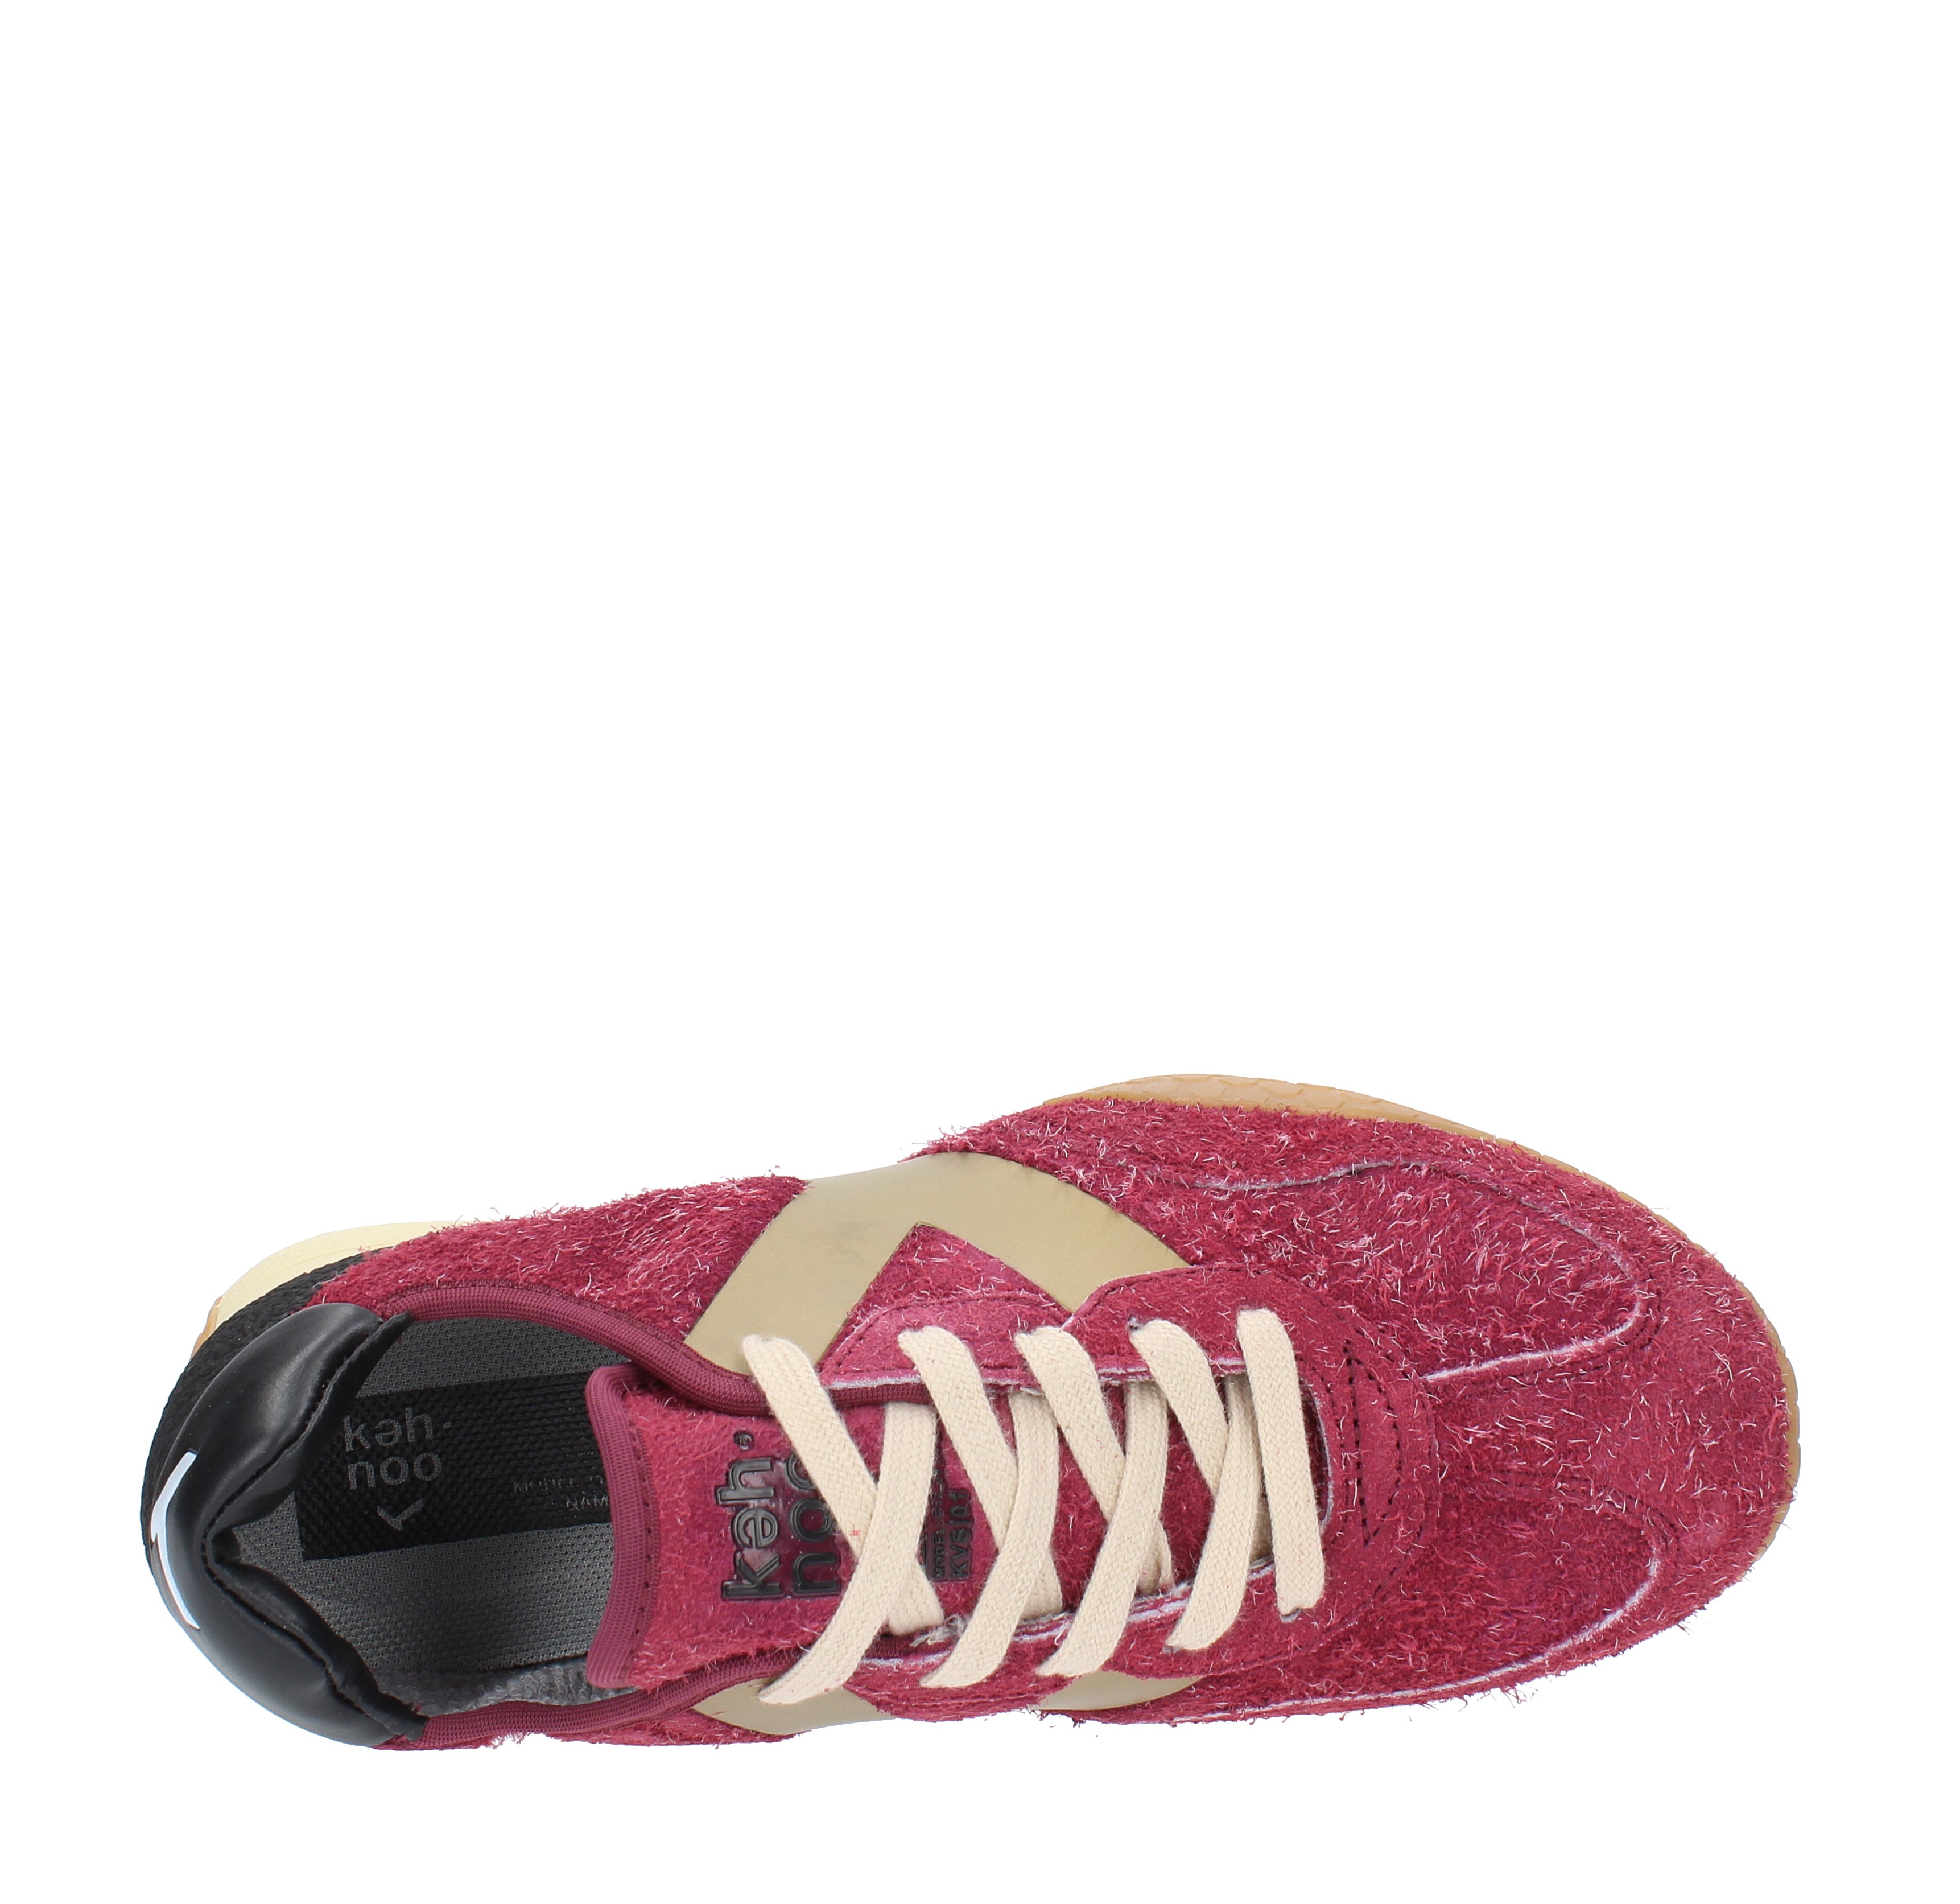 KEH NOO trainers in fabric suede and rubber KEH NOO | S00KW9514ROSSO